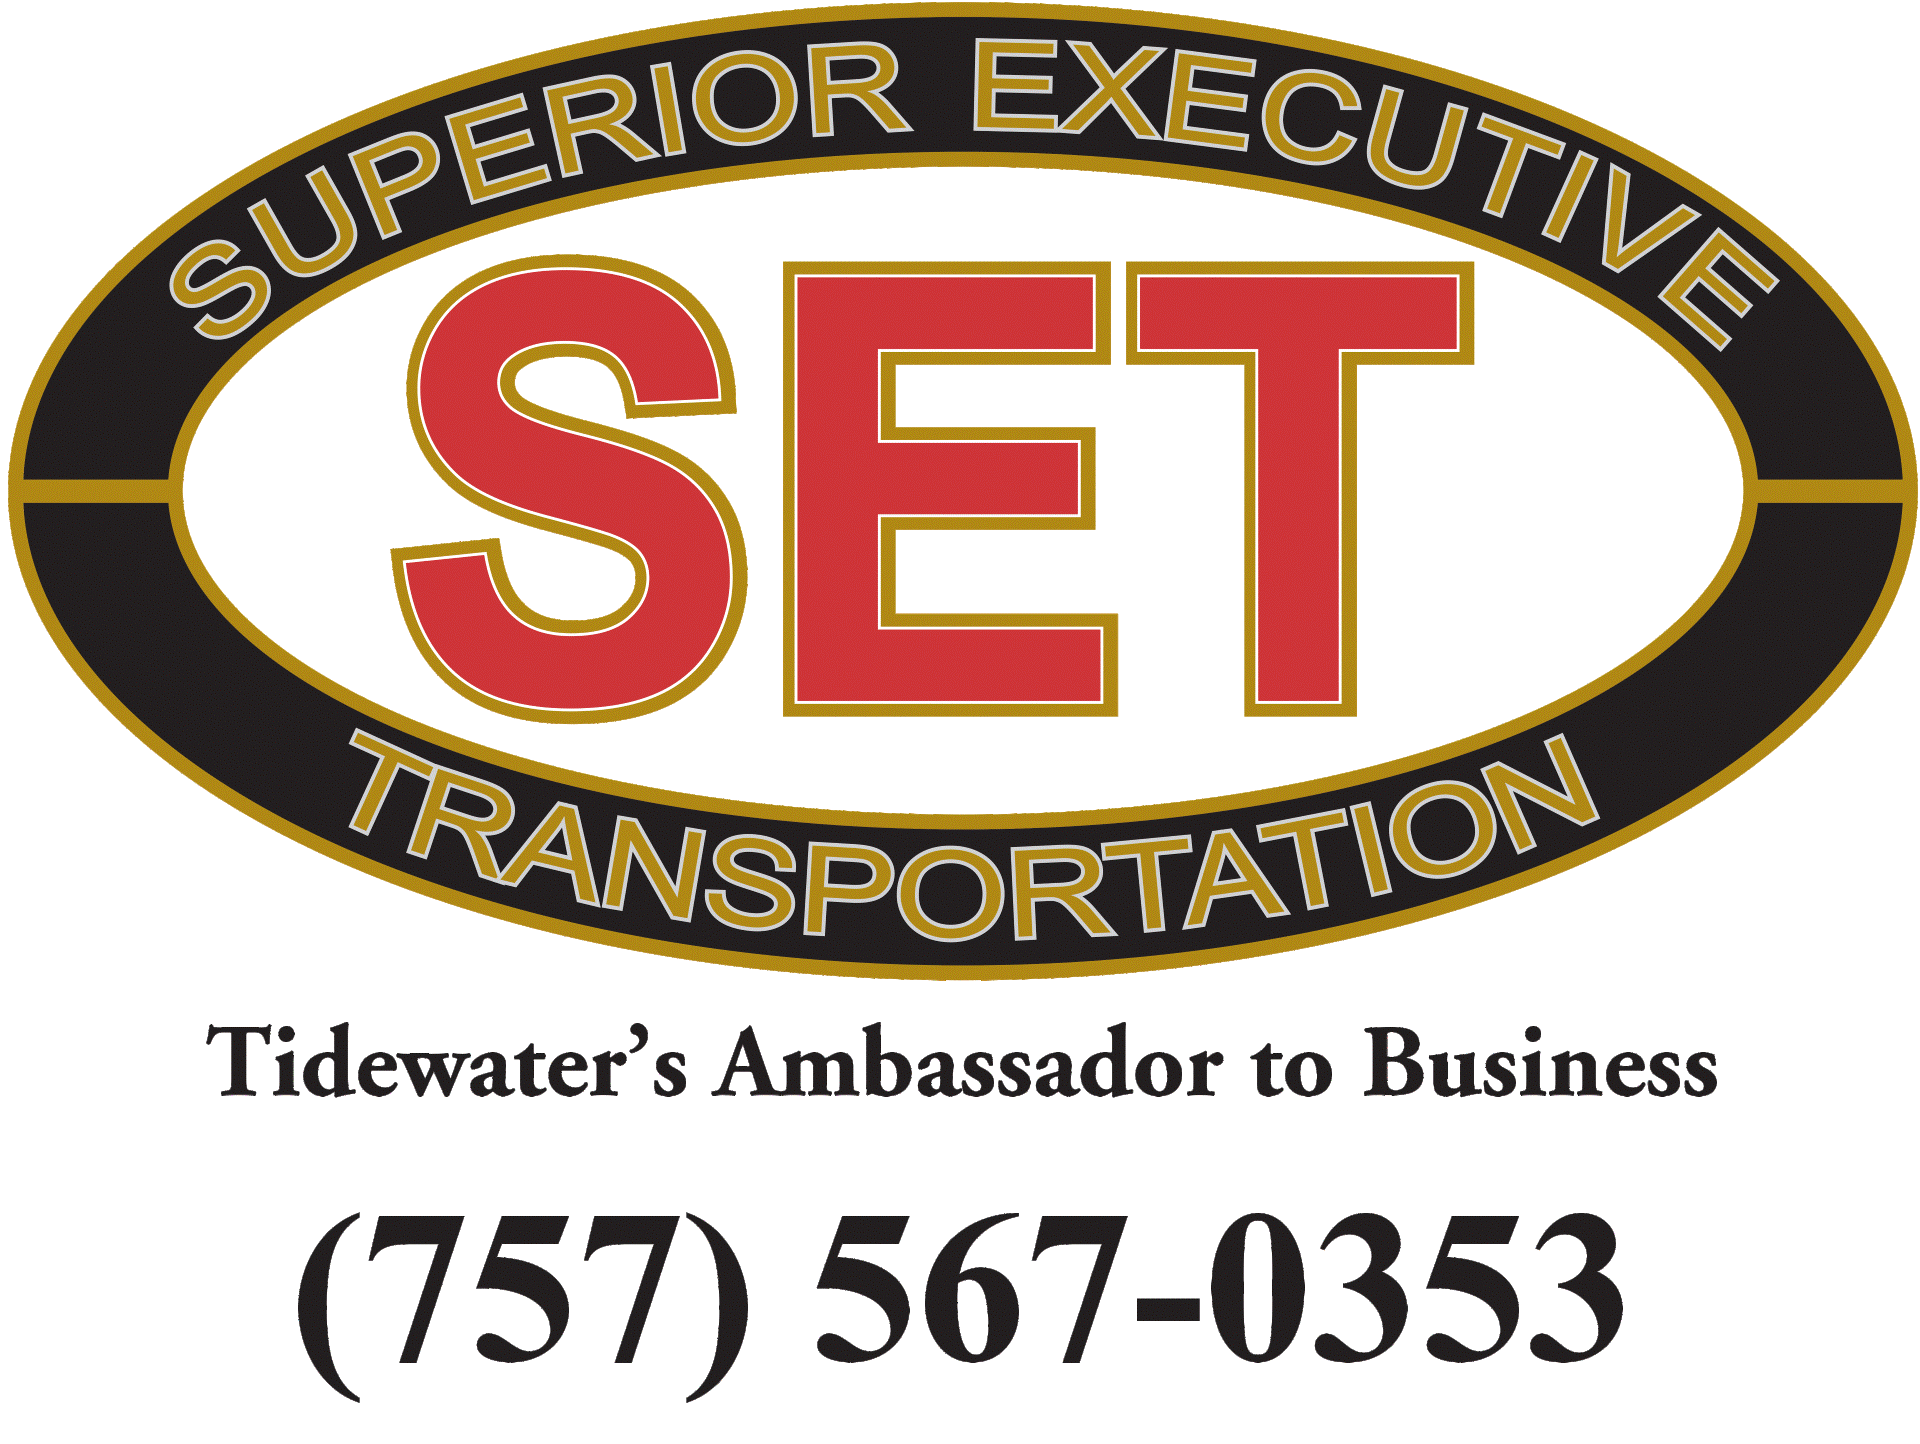 SUPERIOR EXECUTIVE TRANSPORTATION WINS OPERATOR OF THE YEAR AWARD FOR LCT.